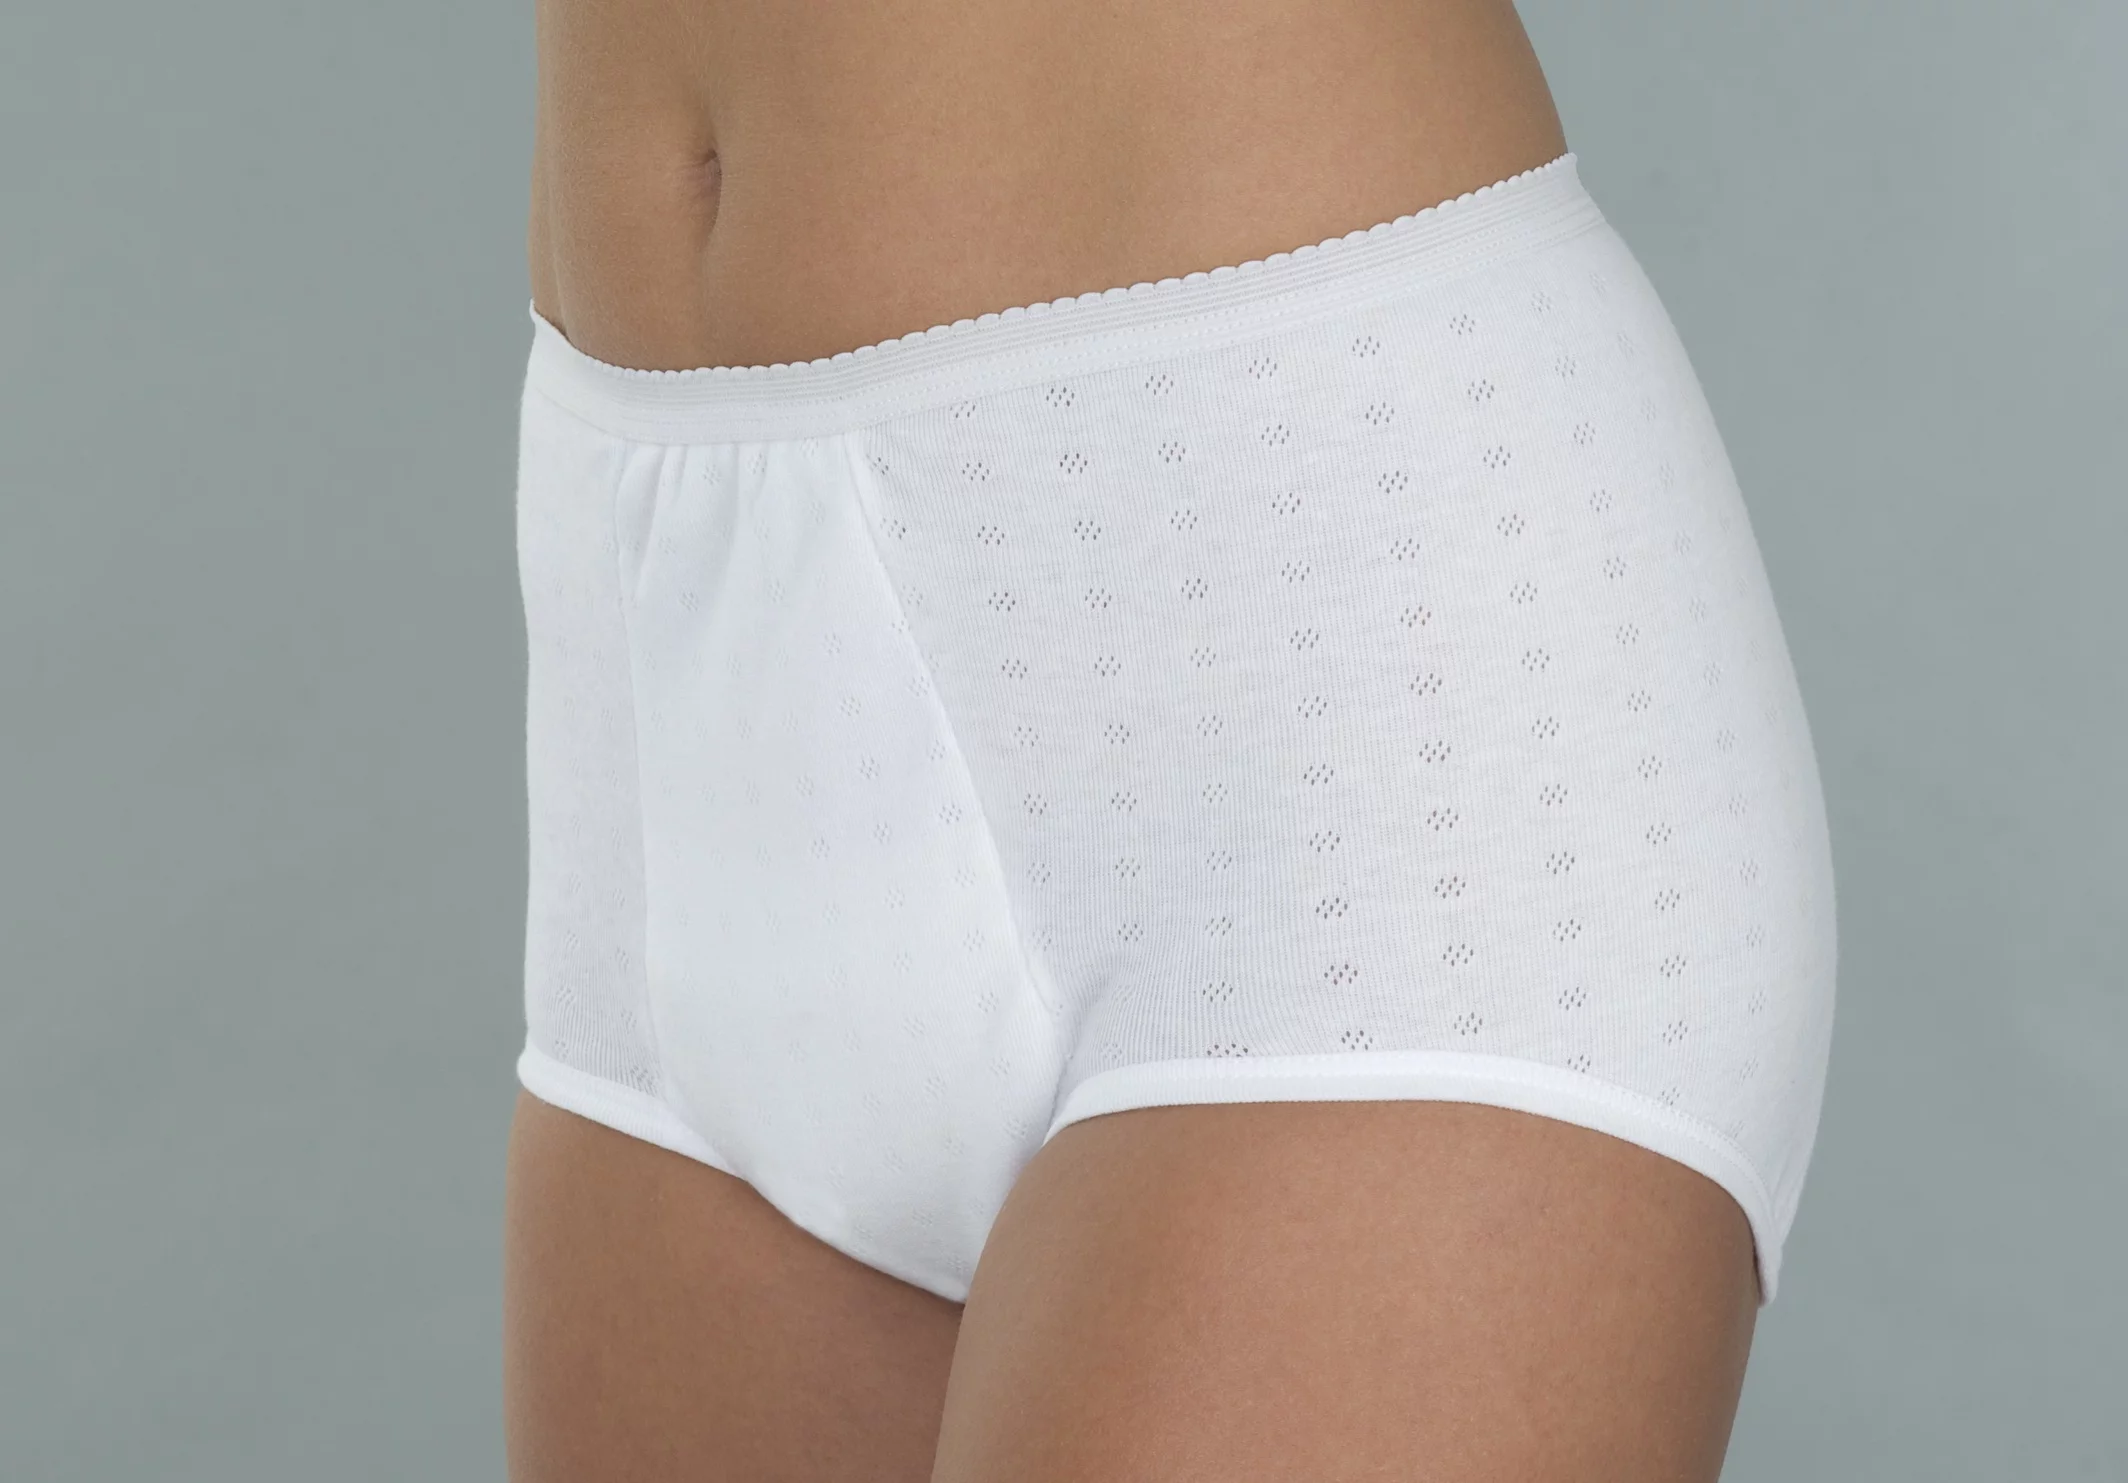 8 Best Incontinence Underwear For Women for 2023